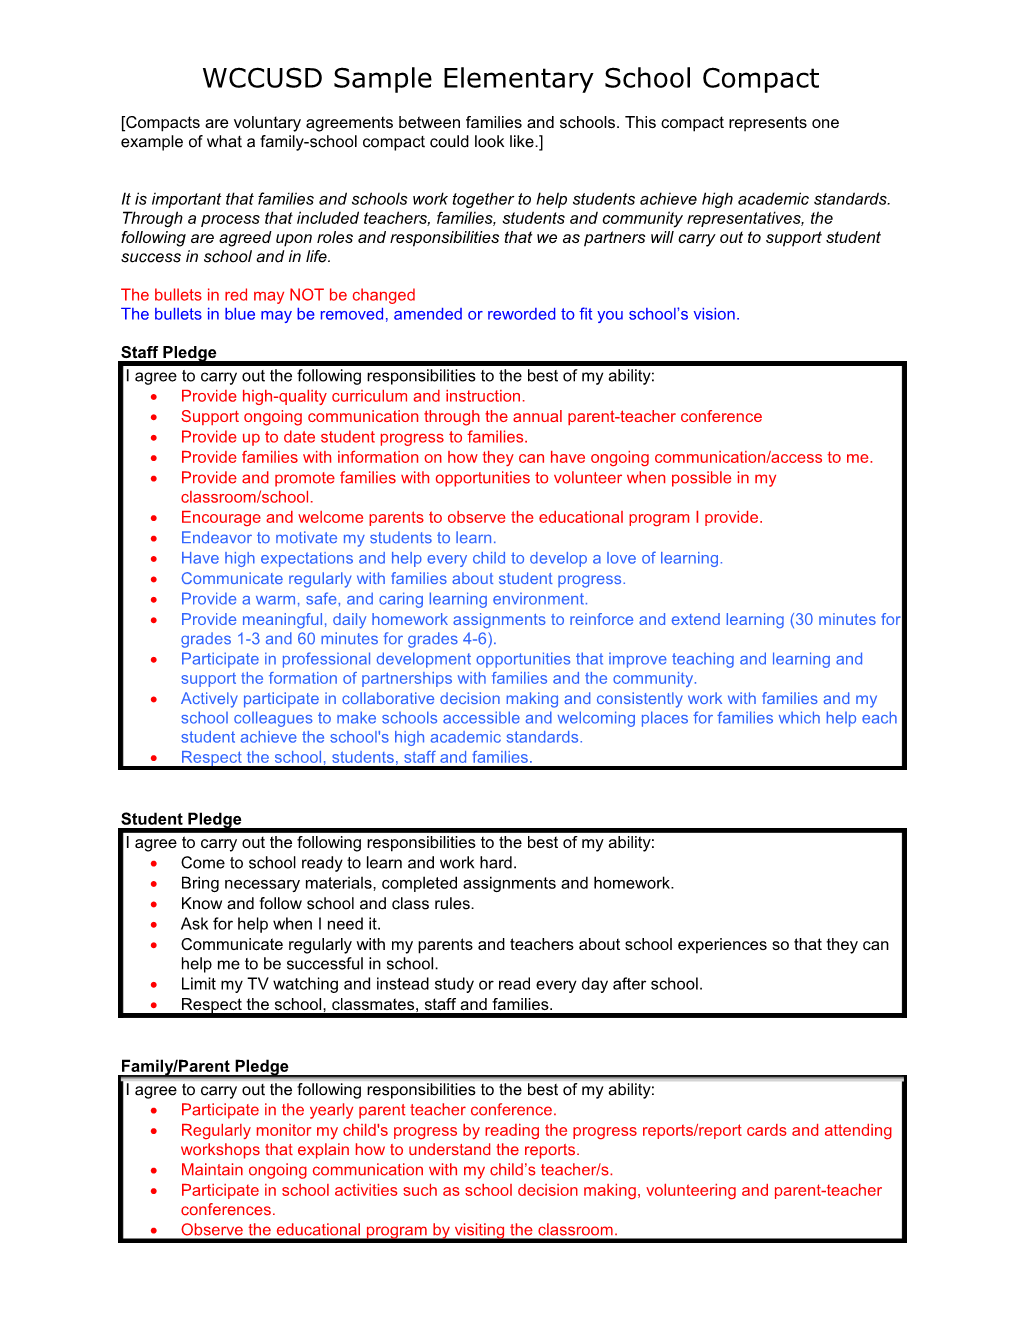 Sample Sample Elementary School Compact - Parent Family (CA Dept. of Education)